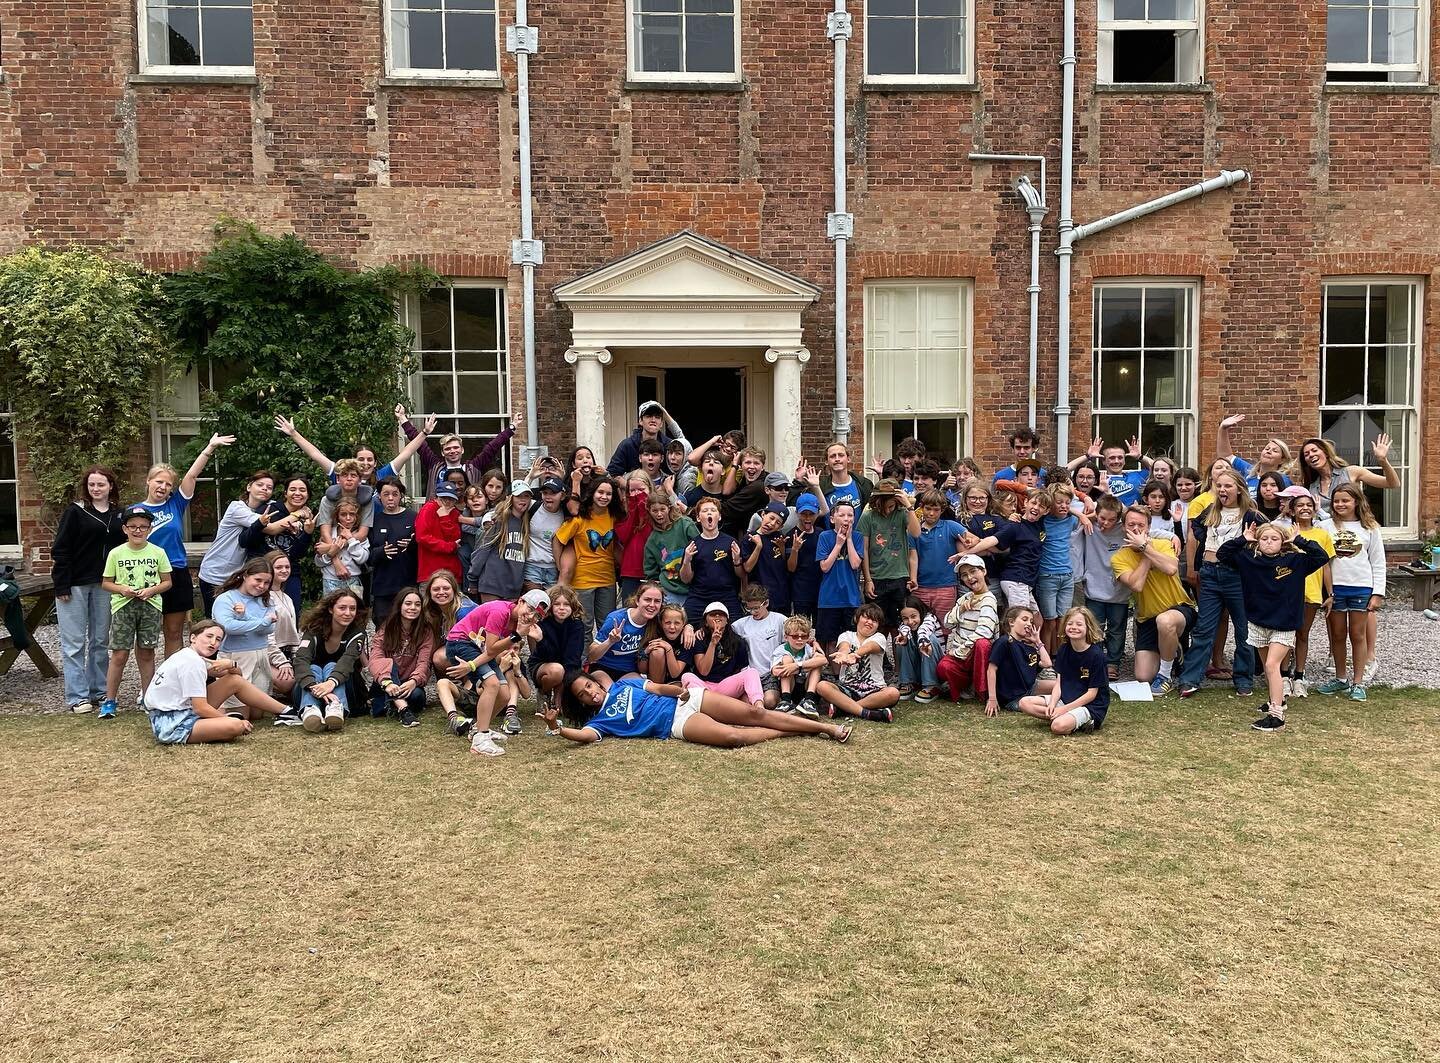 What an end to an amazing summer. So many fun memories, so many wonderful campers, so many people to thank. We hope to see you all again next year ❤️❤️❤️

#summercamp #uksummercamp #summercamp2022 #campcrusoe